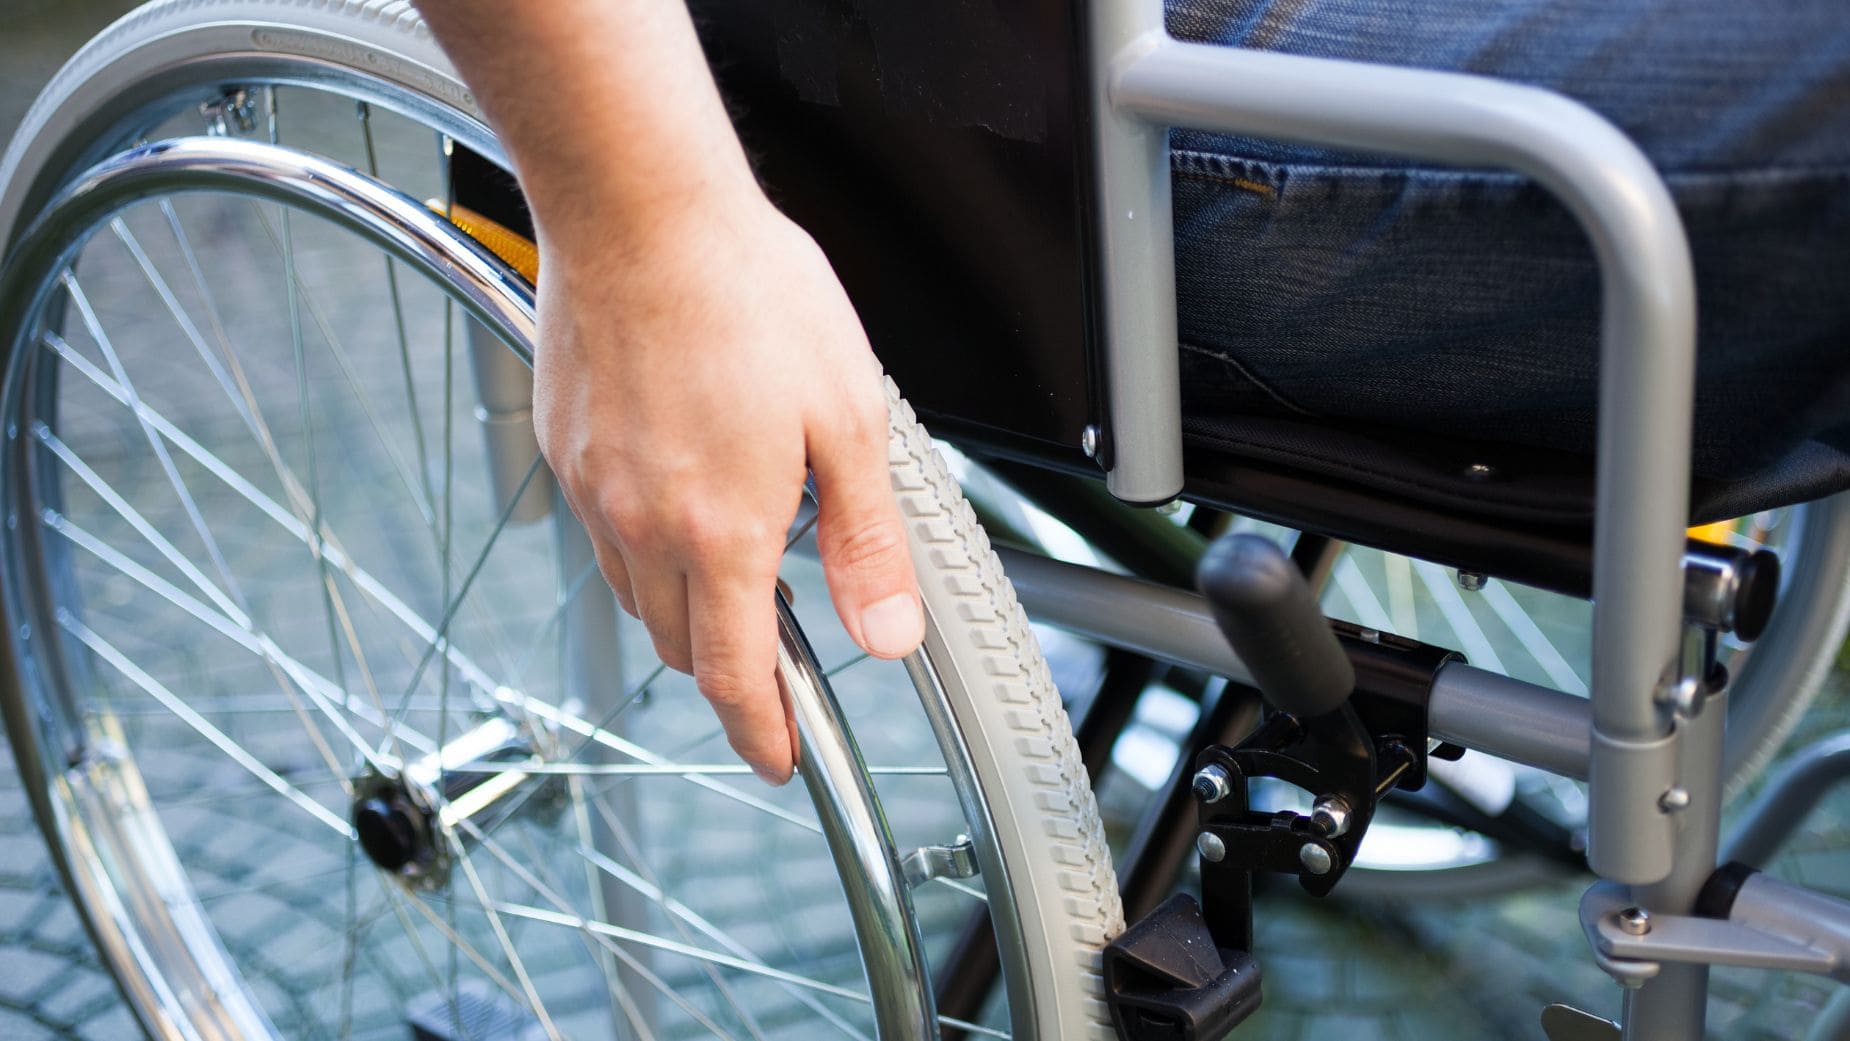 Today is the last payment day for Disability Benefits